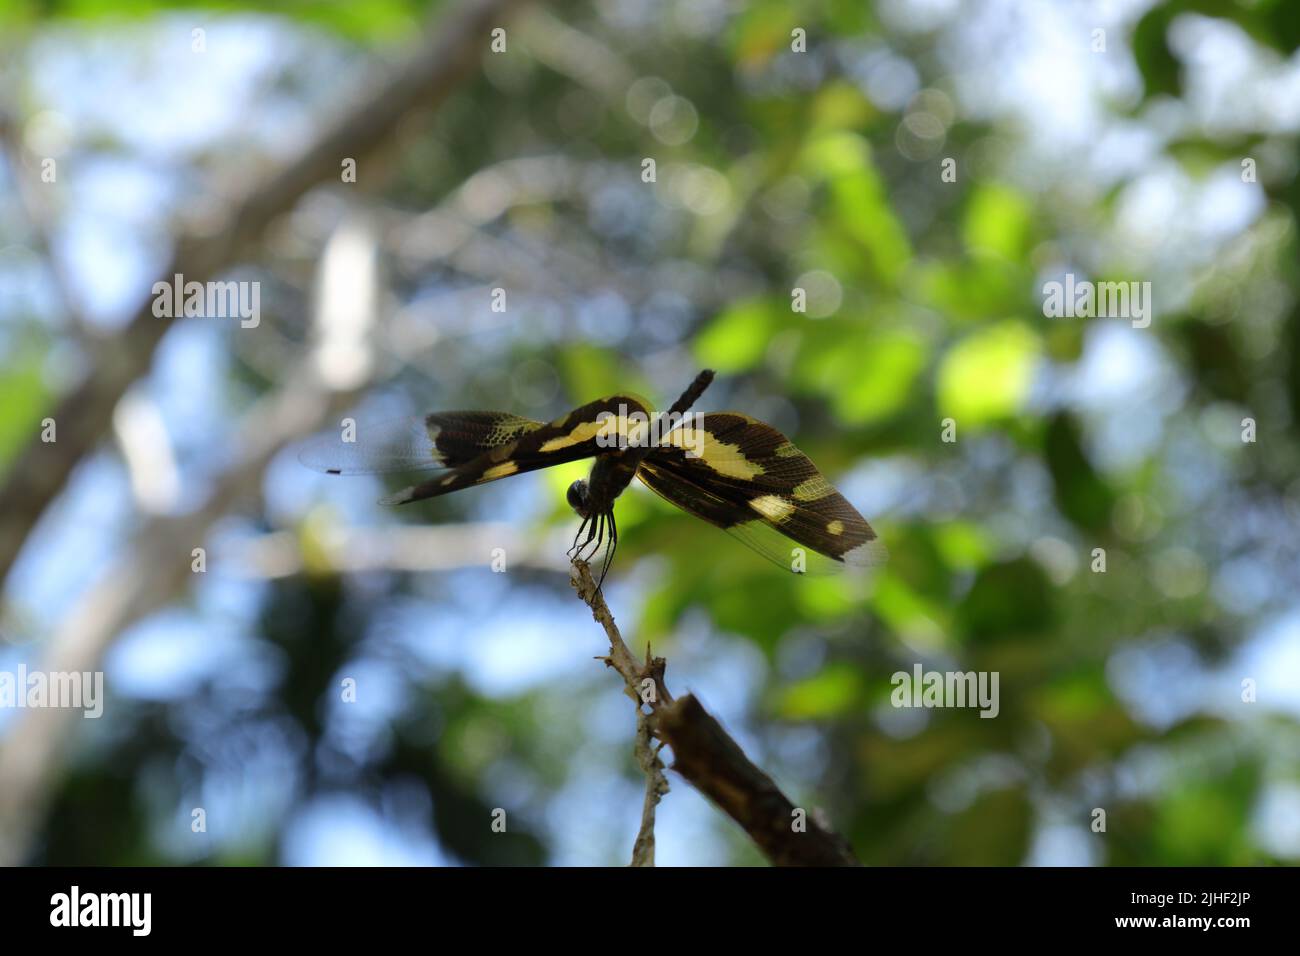 A Variegated Flutterer or Common Picture Wing dragonfly is perched on top of a dry stem tip while spreading its wings parallel, low angle view Stock Photo